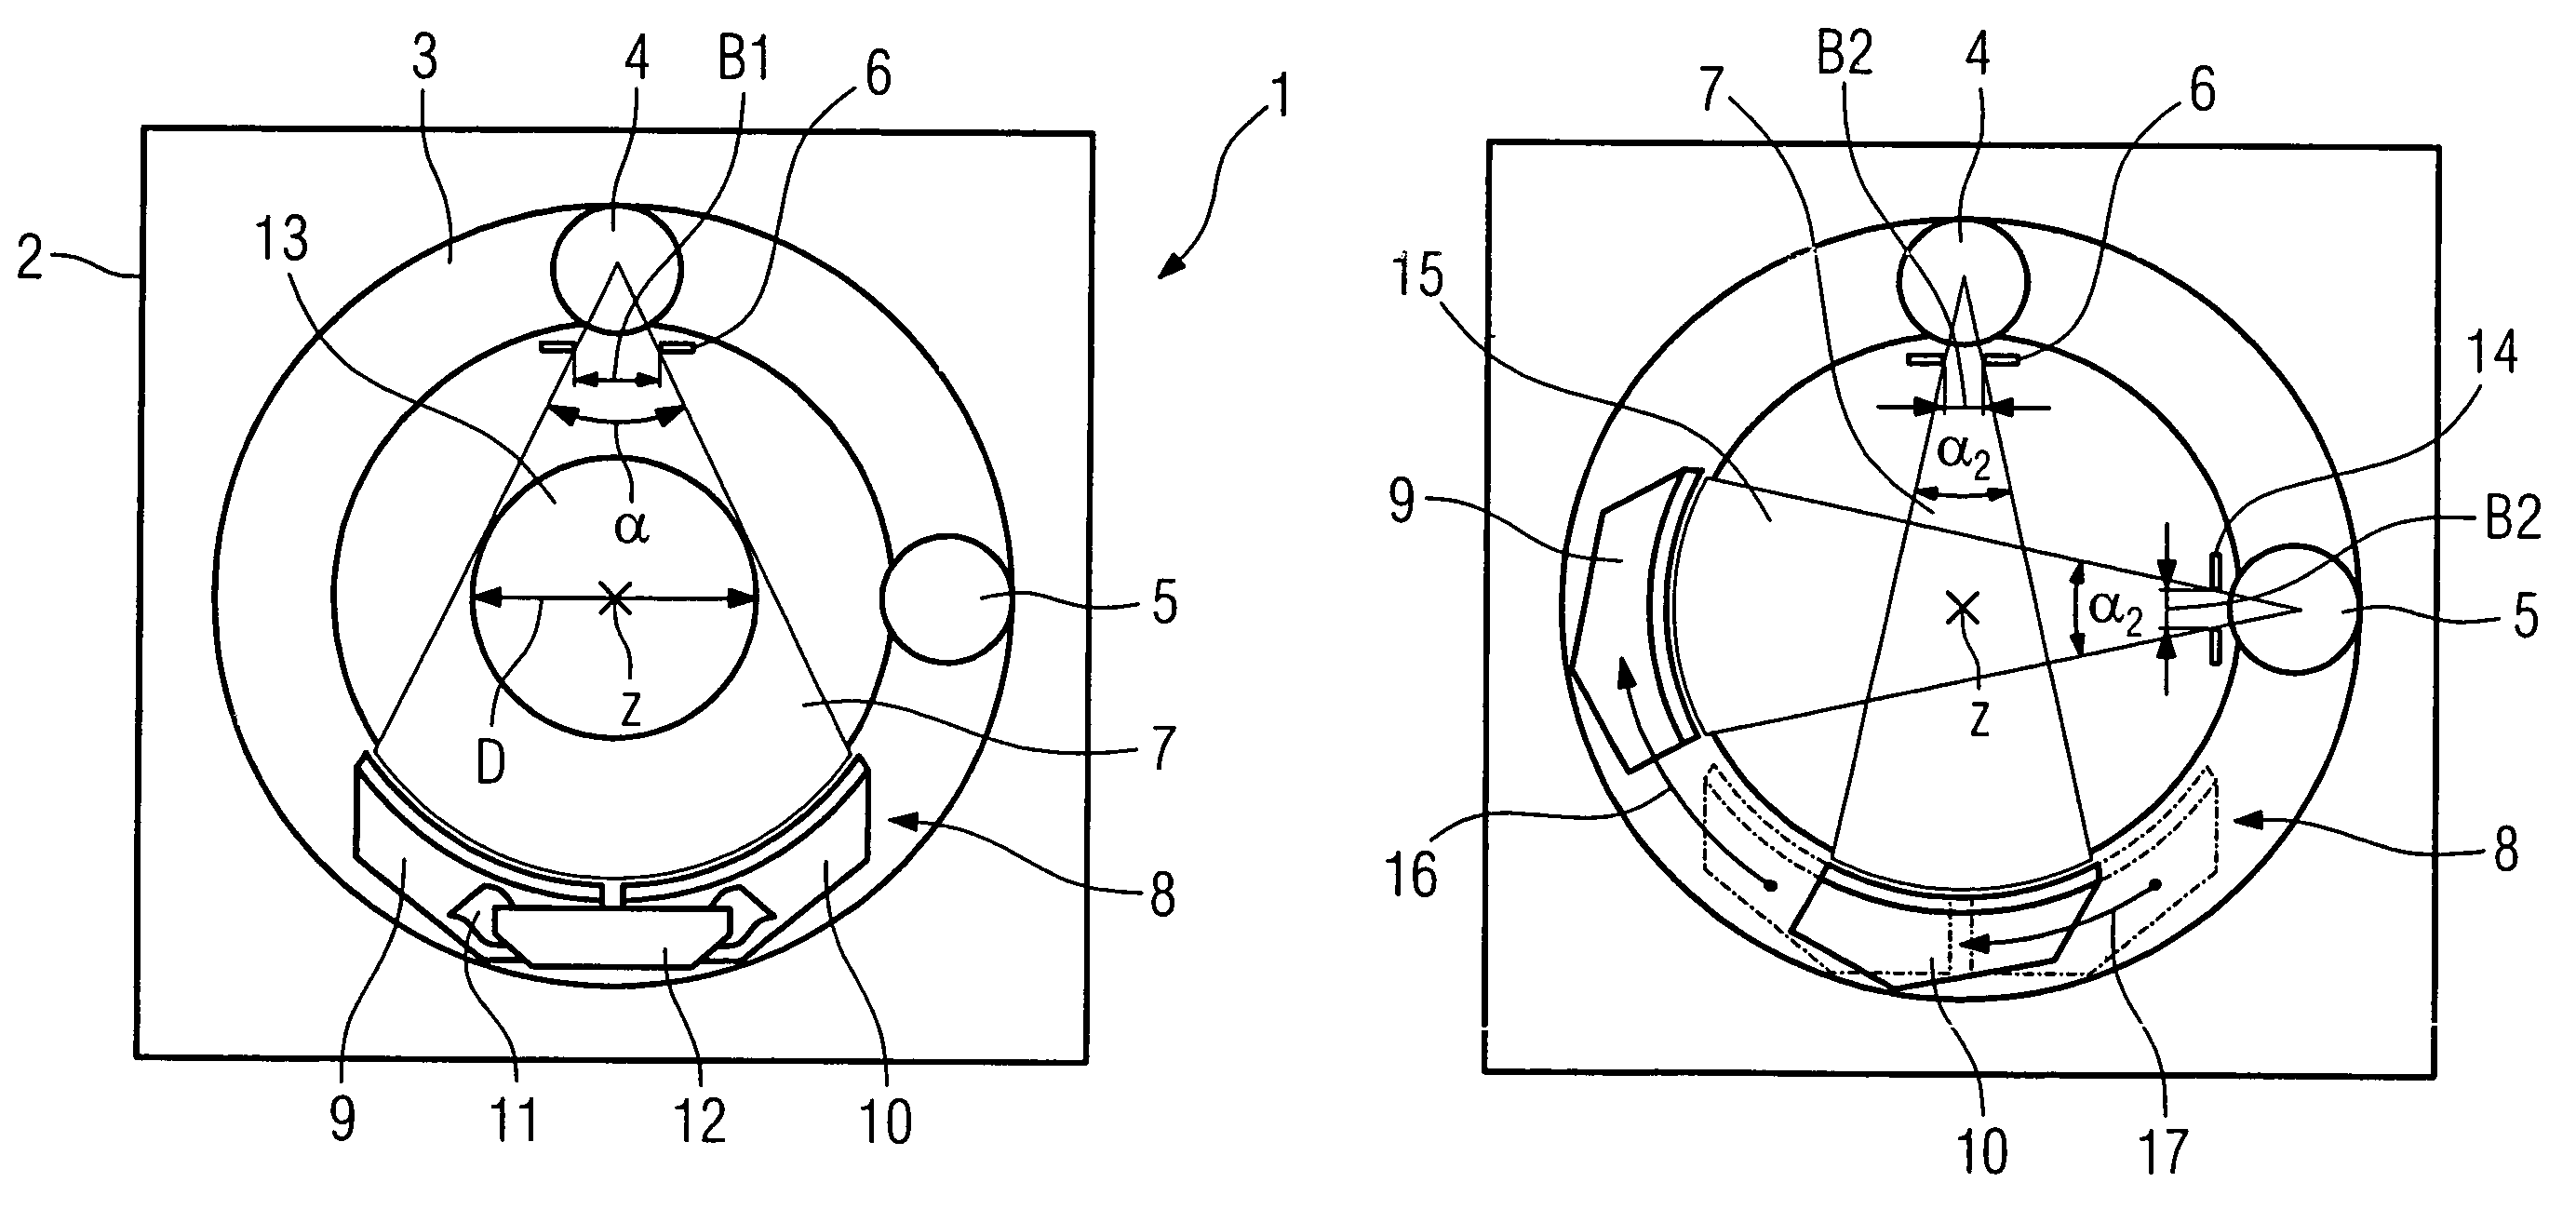 Imaging tomography apparatus with multiple operating modes